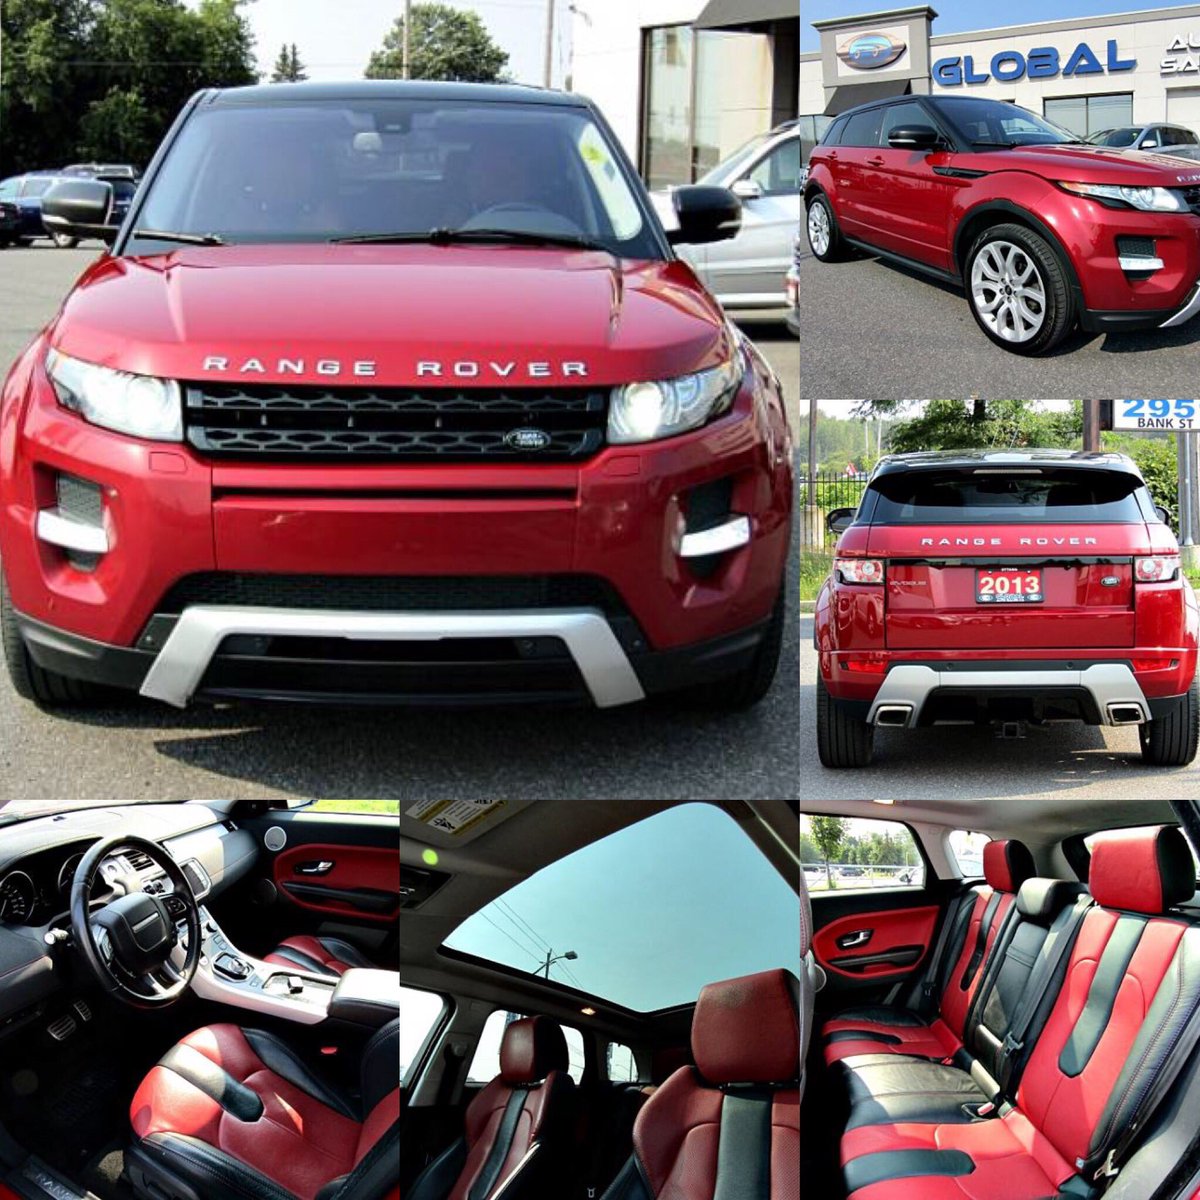 Meet Auto On Twitter Red Rover Red Rover Evoque Come Over